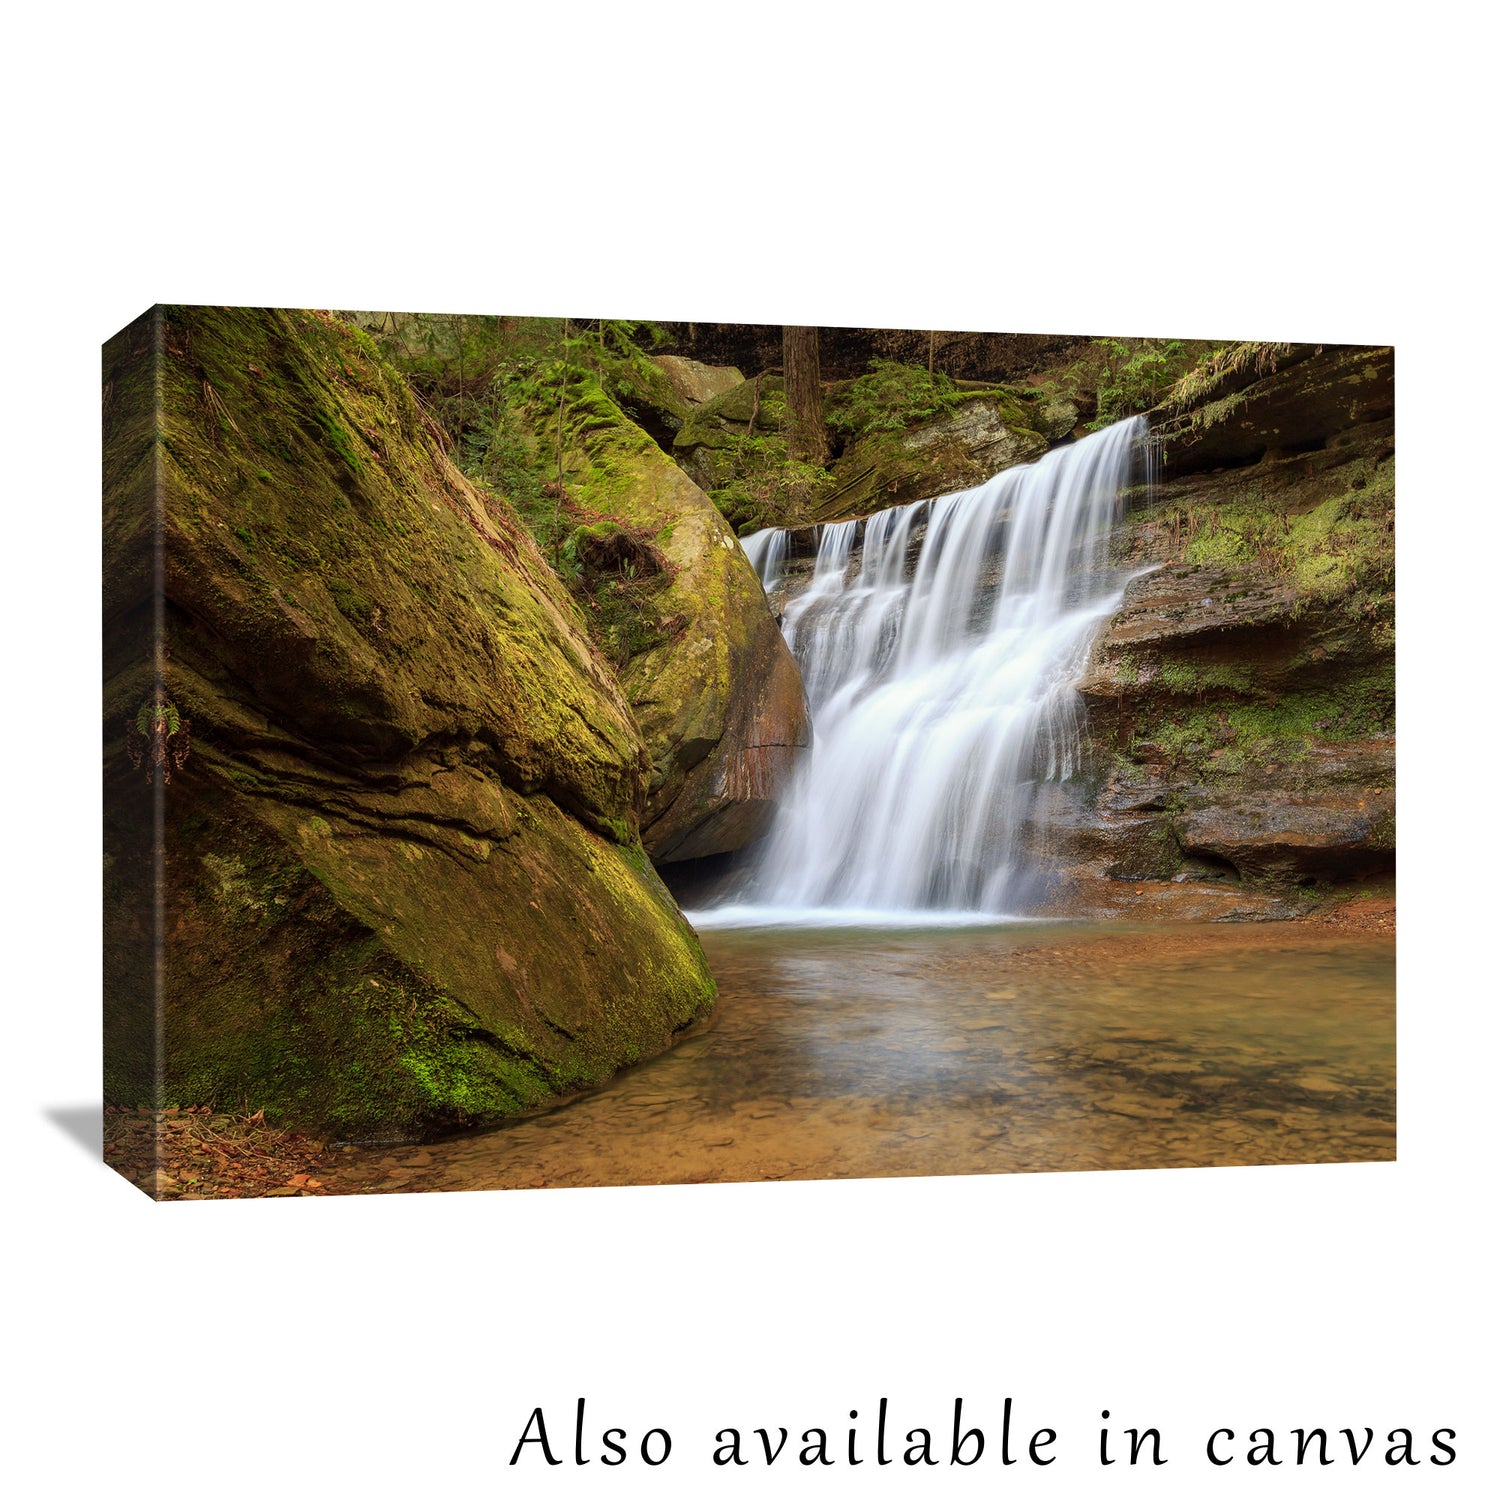 The Hocking Hills photograph is beautifully presented on a gallery-wrapped canvas, showing this photograph is also available as a canvas print for those interested in a ready-to-hang solution.